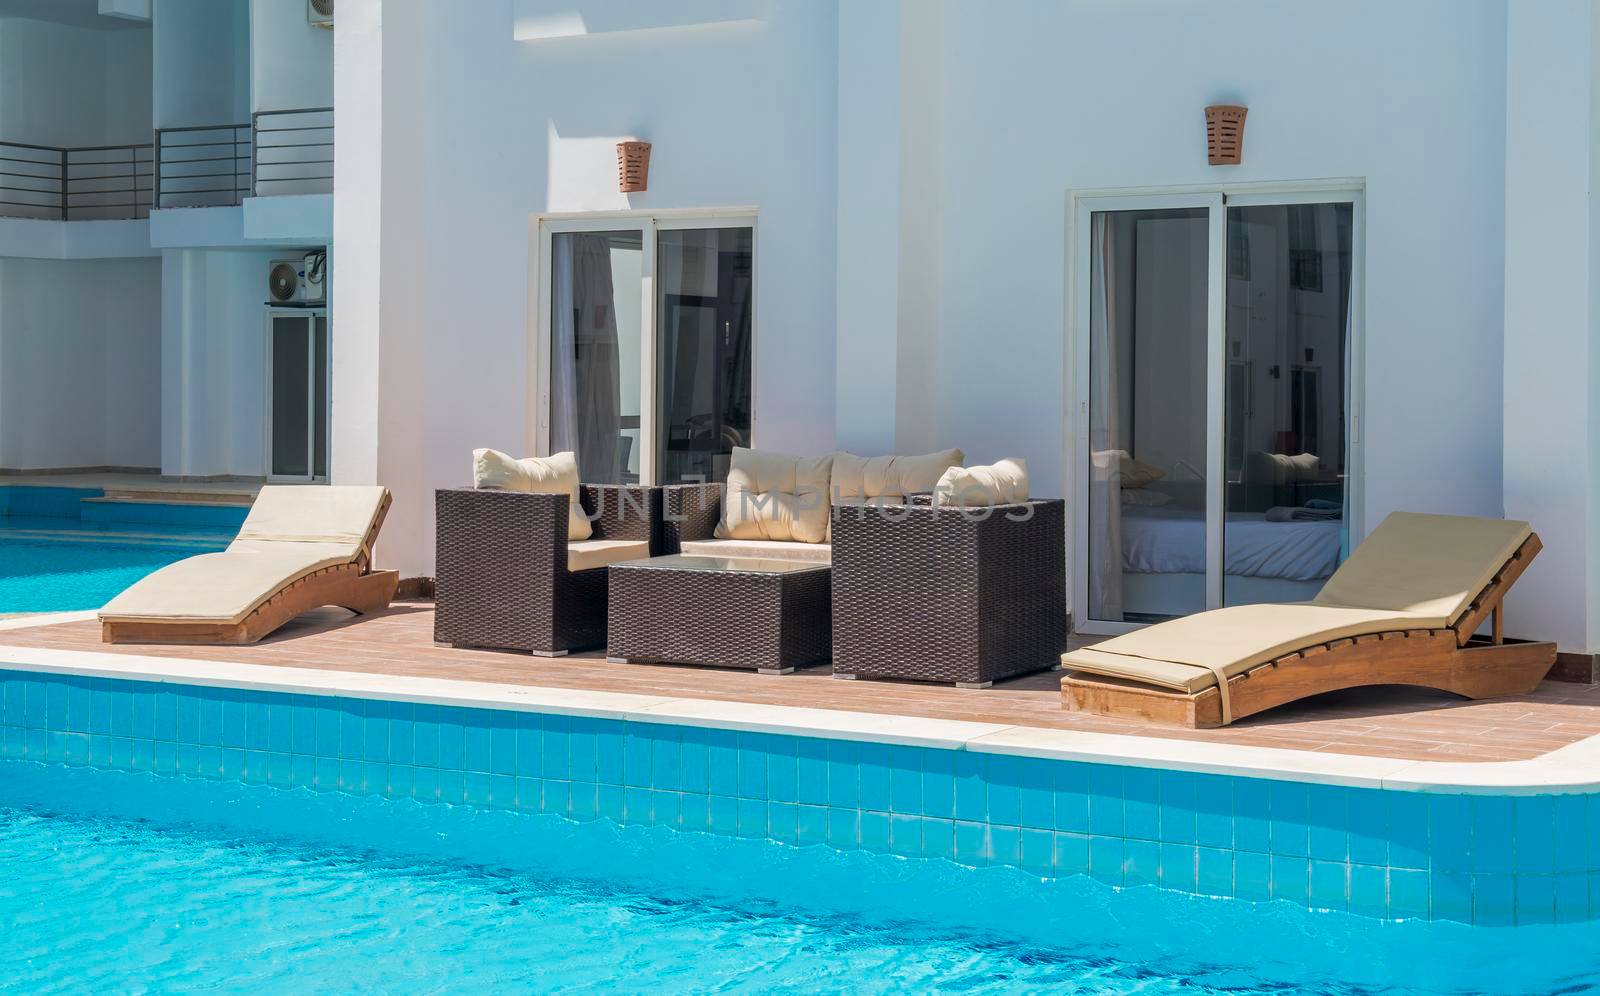 Outdoor terrace patio furniture at a luxury holiday apartment in tropical resort with swimming pool view